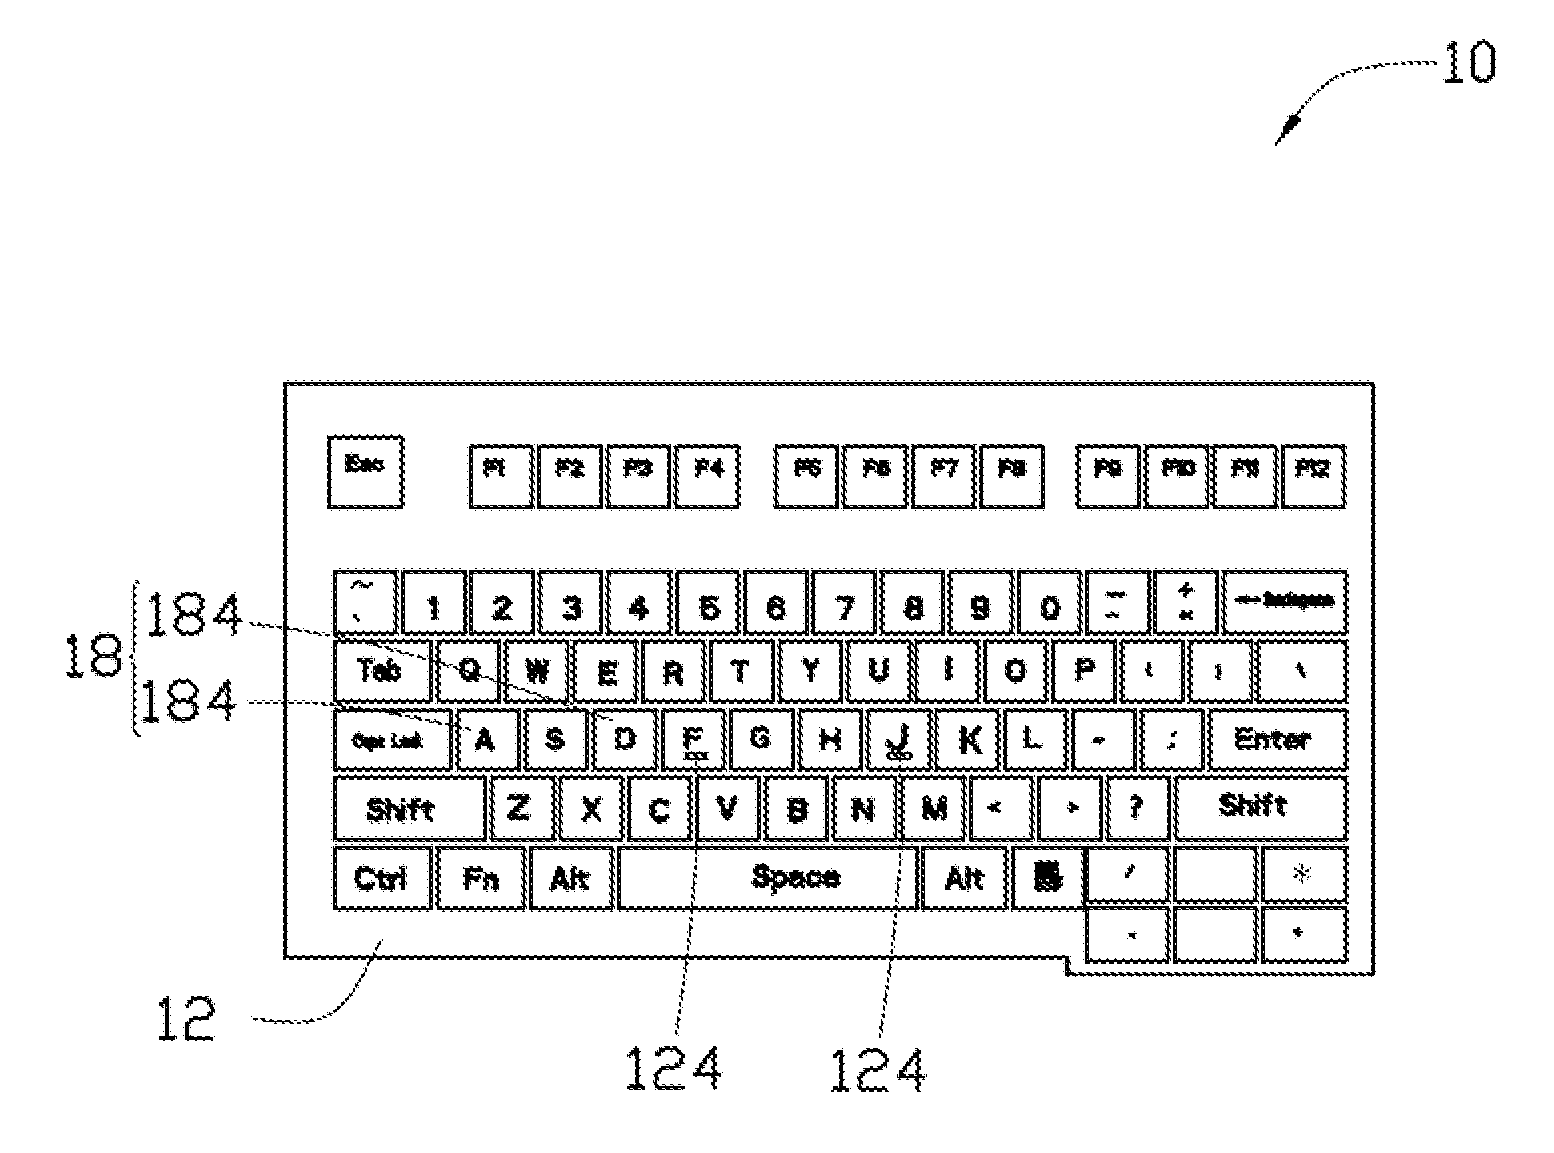 Touch-control type keyboard